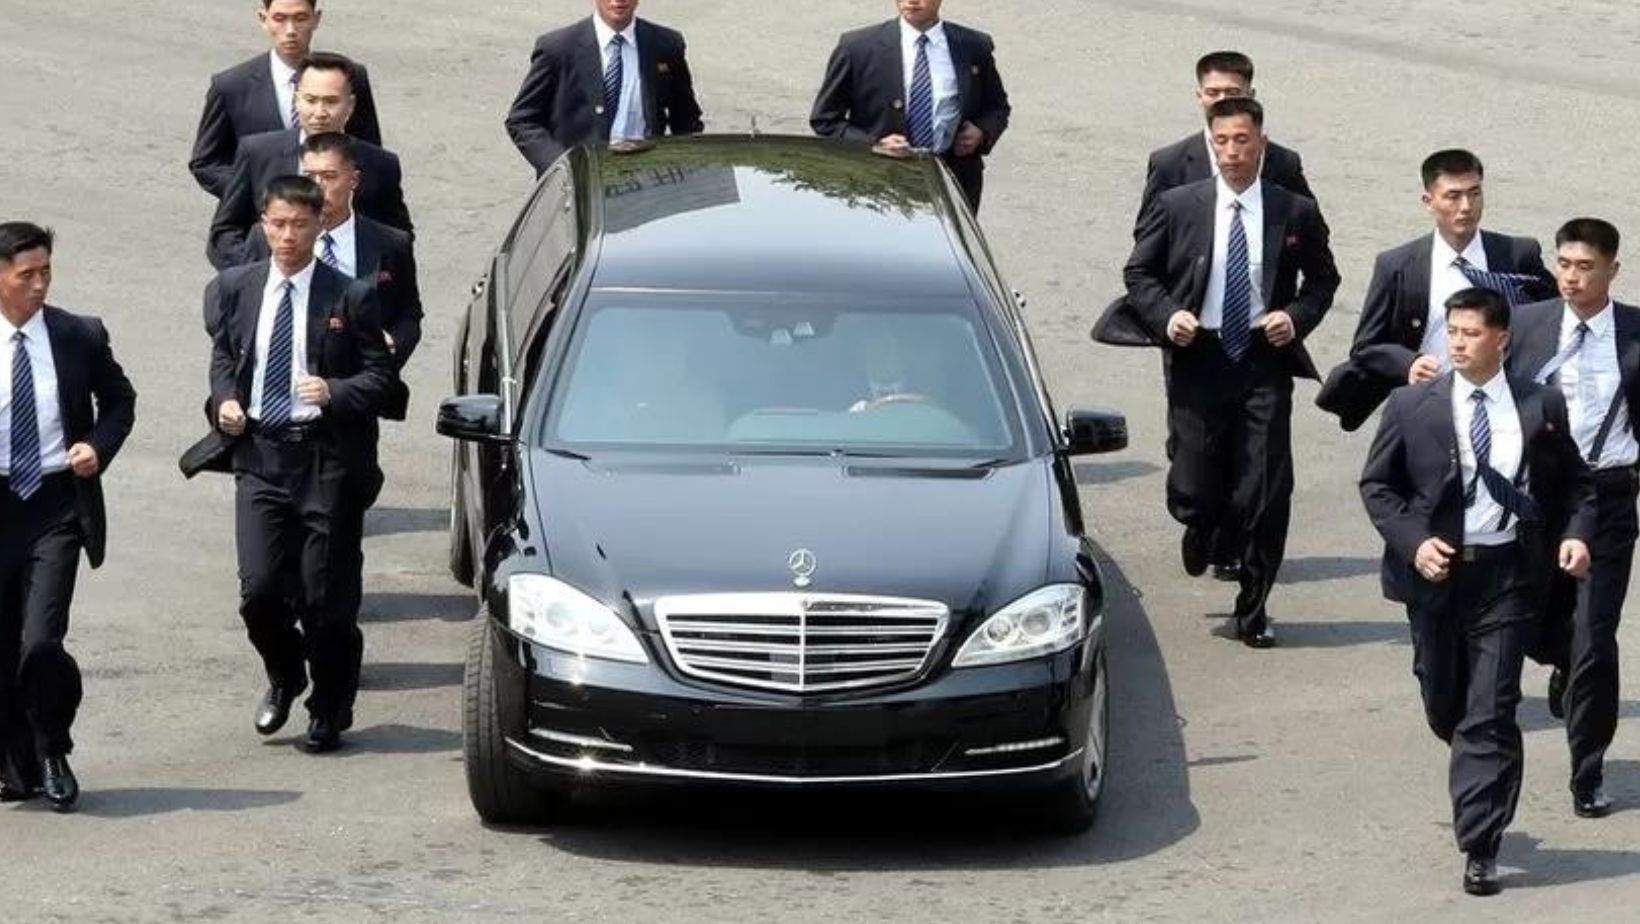 Kim Jong Un also uses luxury cars and favours the Mercedes-Benz S-Class